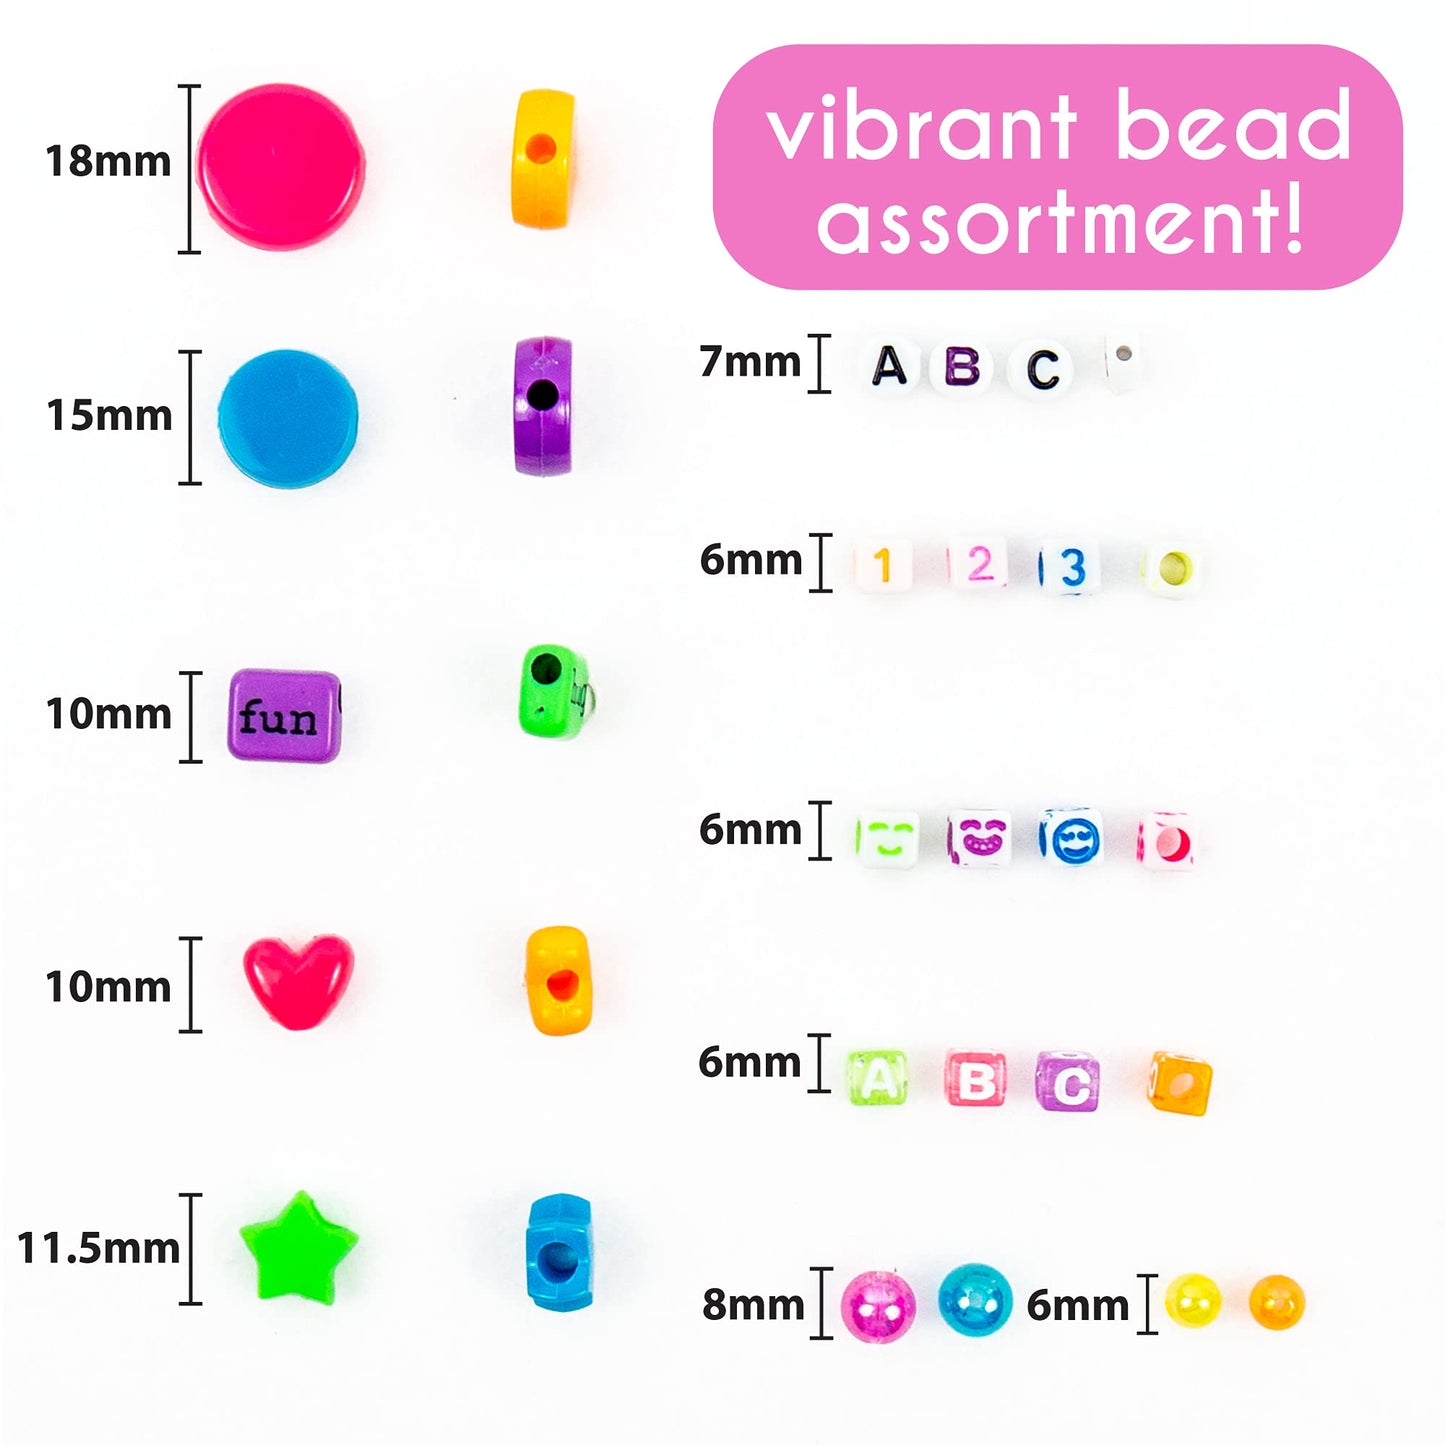 Just My Style Emoticon Message Beads, DIY 20+ Custom Accessories Using Symbols Alphabet Letters & Emojis, Great for Sleepover & Girls Night, Perfect